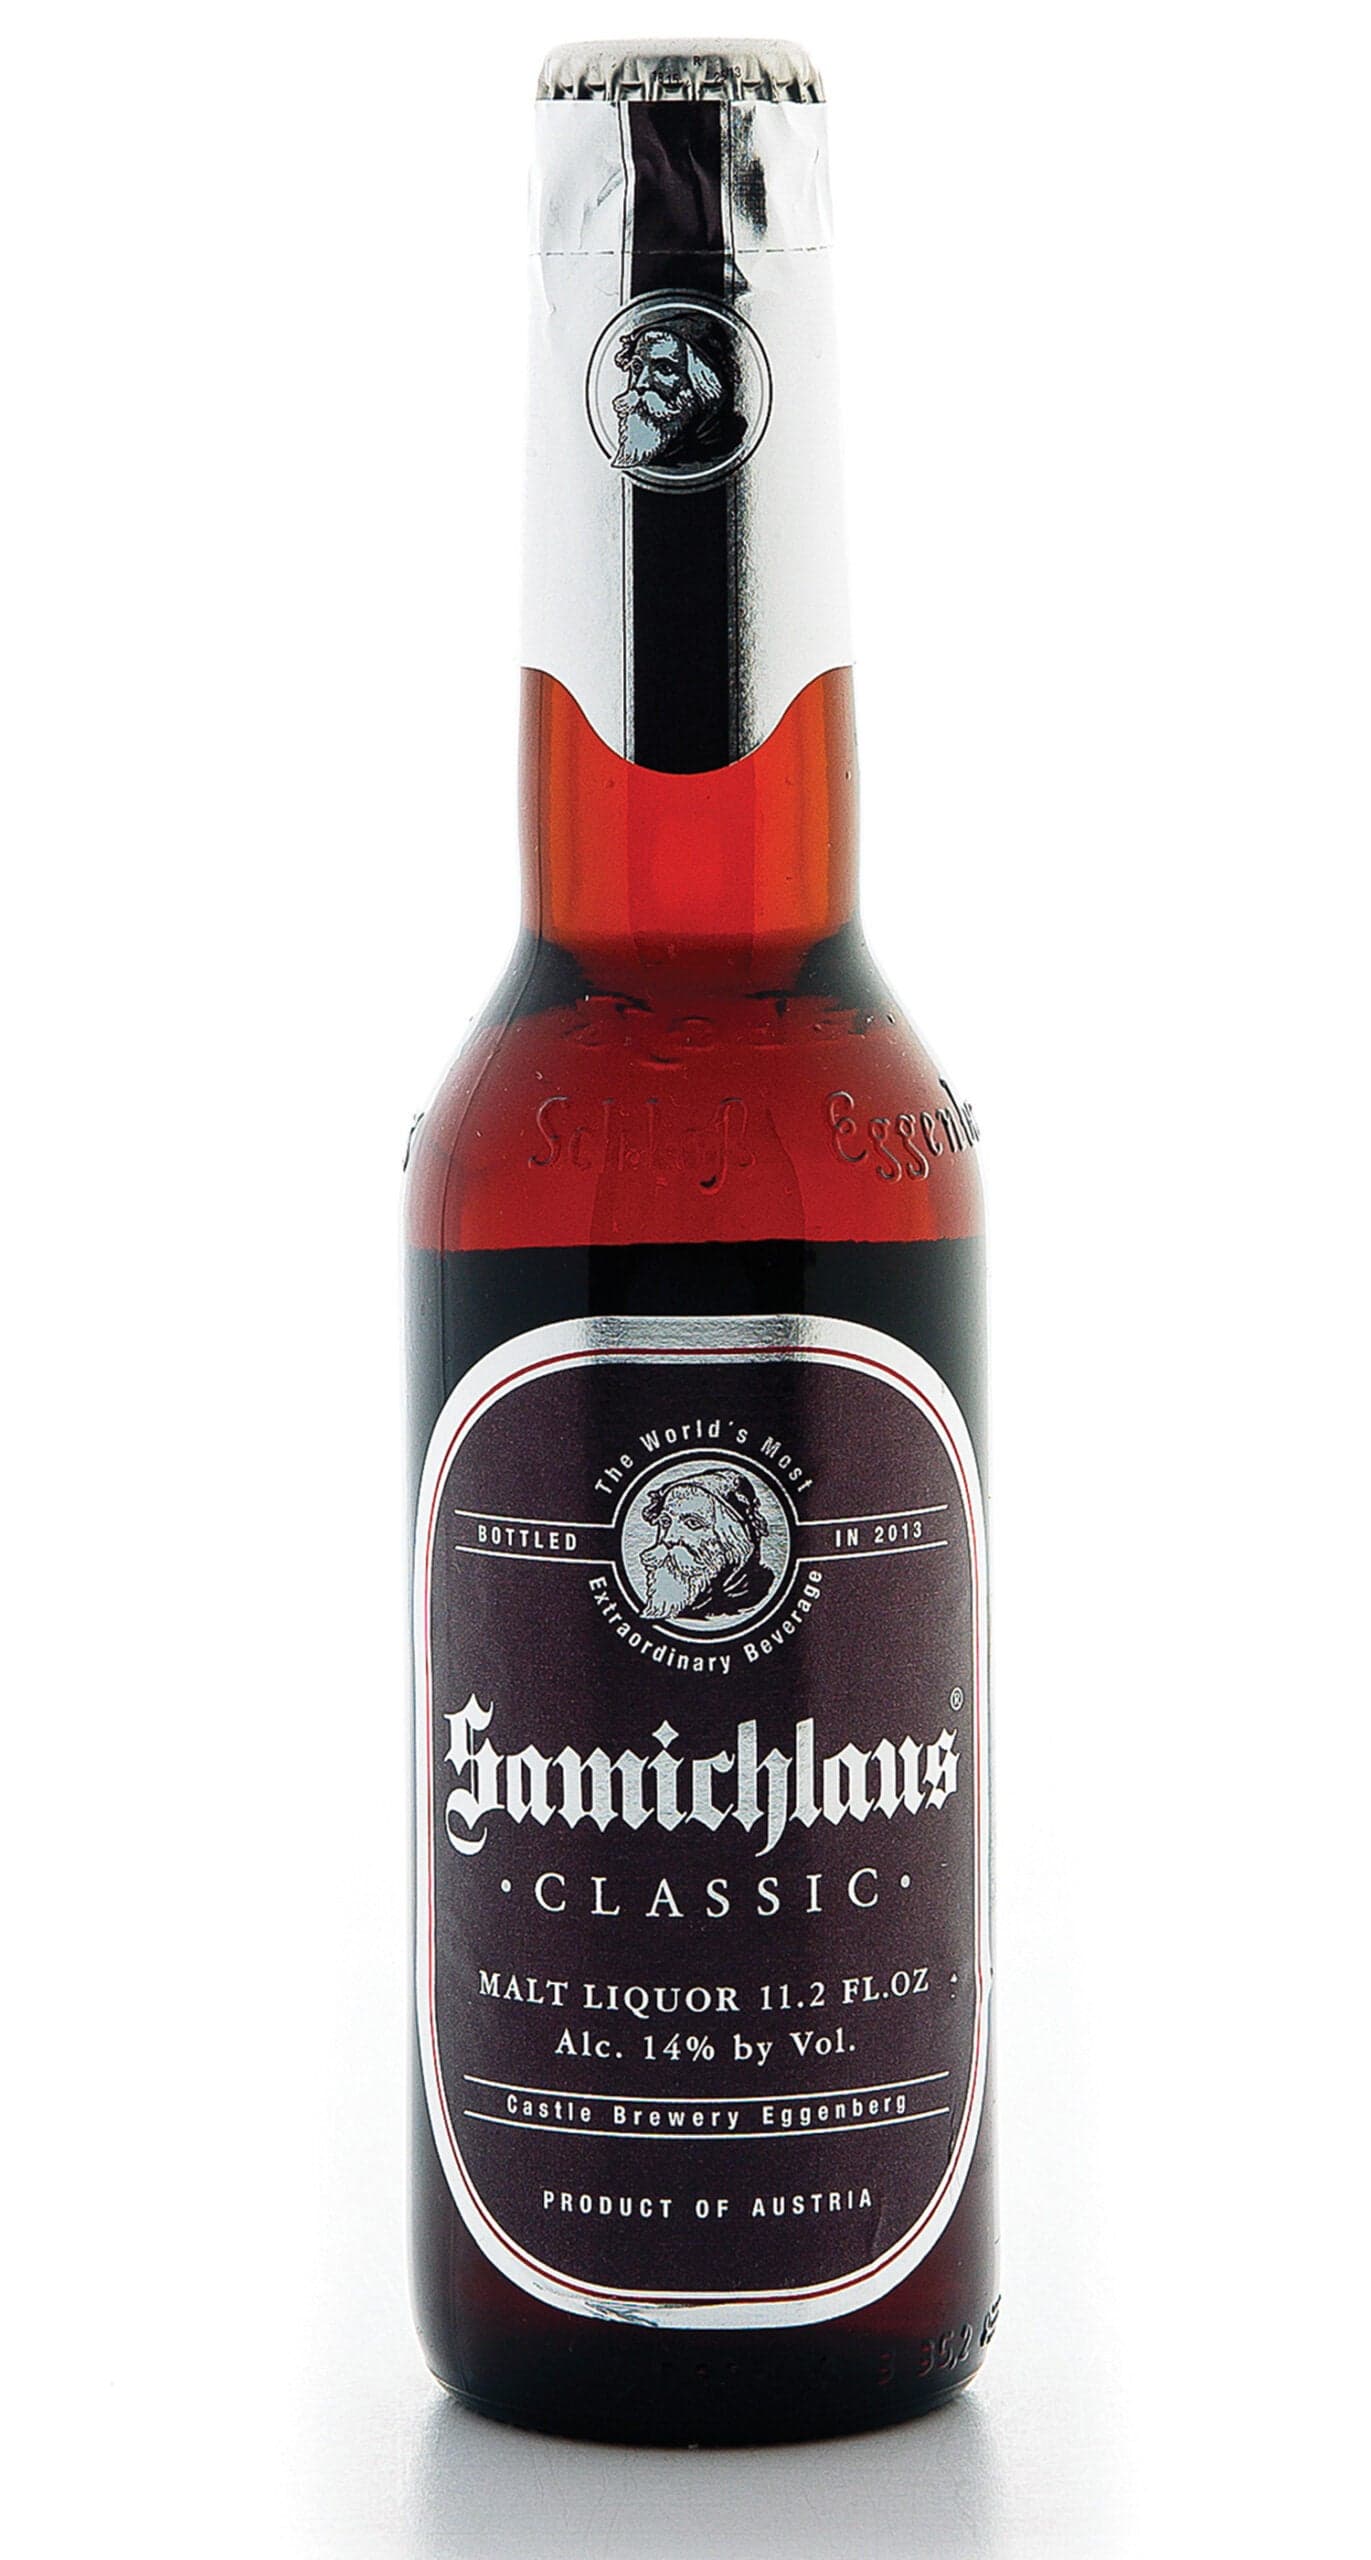 Eggenberg Samichlaus Classic Holiday Beer